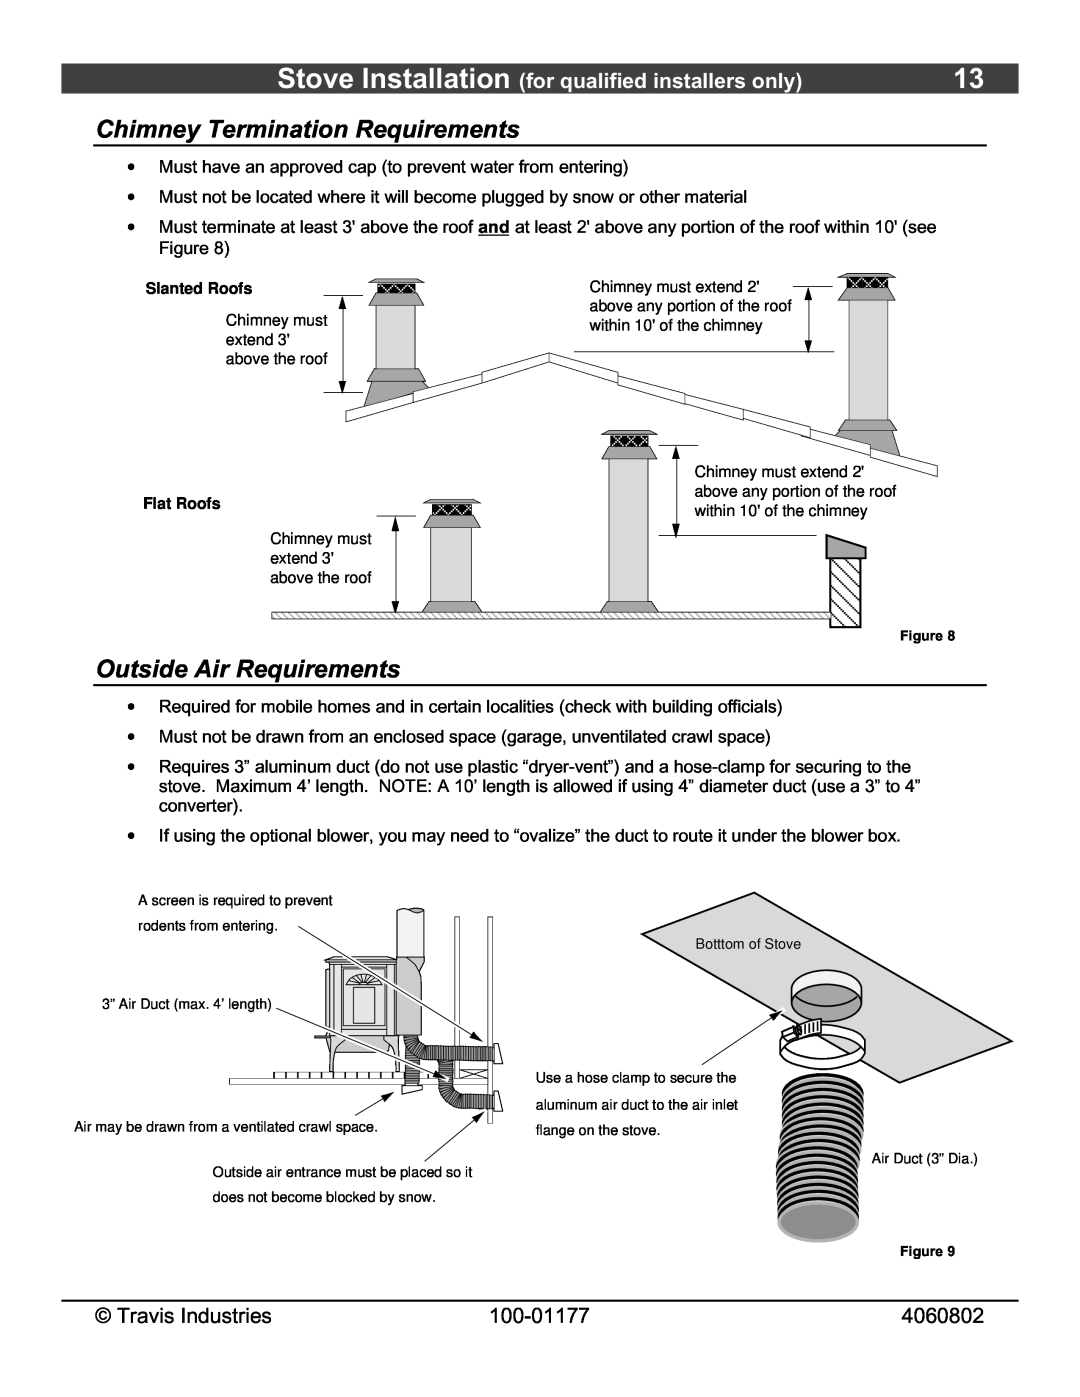 Lopi Leyden Wood Stove owner manual Chimney Termination Requirements, Outside Air Requirements, Slanted Roofs, Flat 